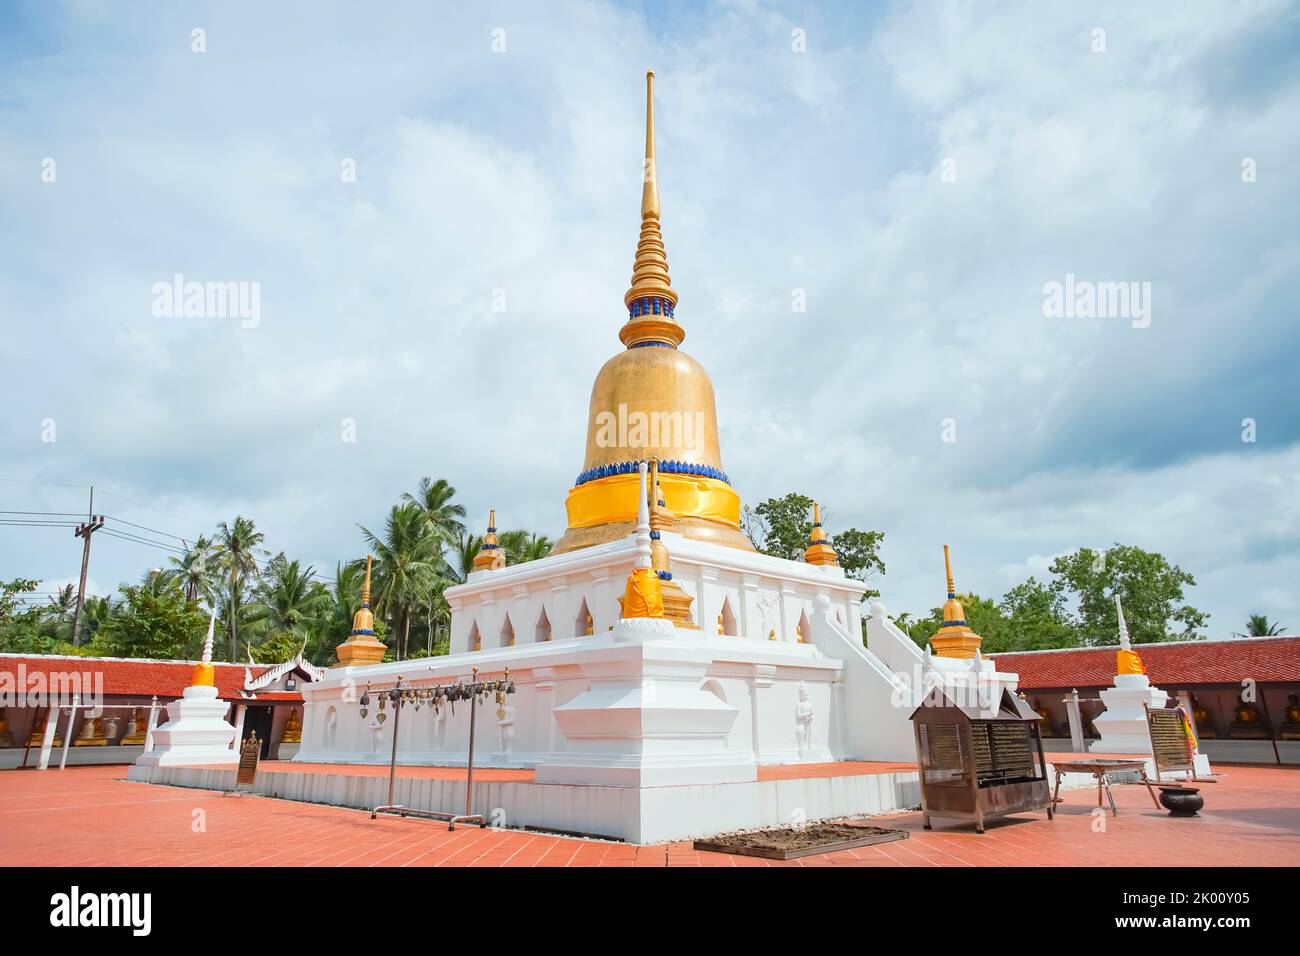 Phra That Sawi is one of travel destinations located in Wat Phra That Sawi Chumphon province, Thailand. Stock Photo